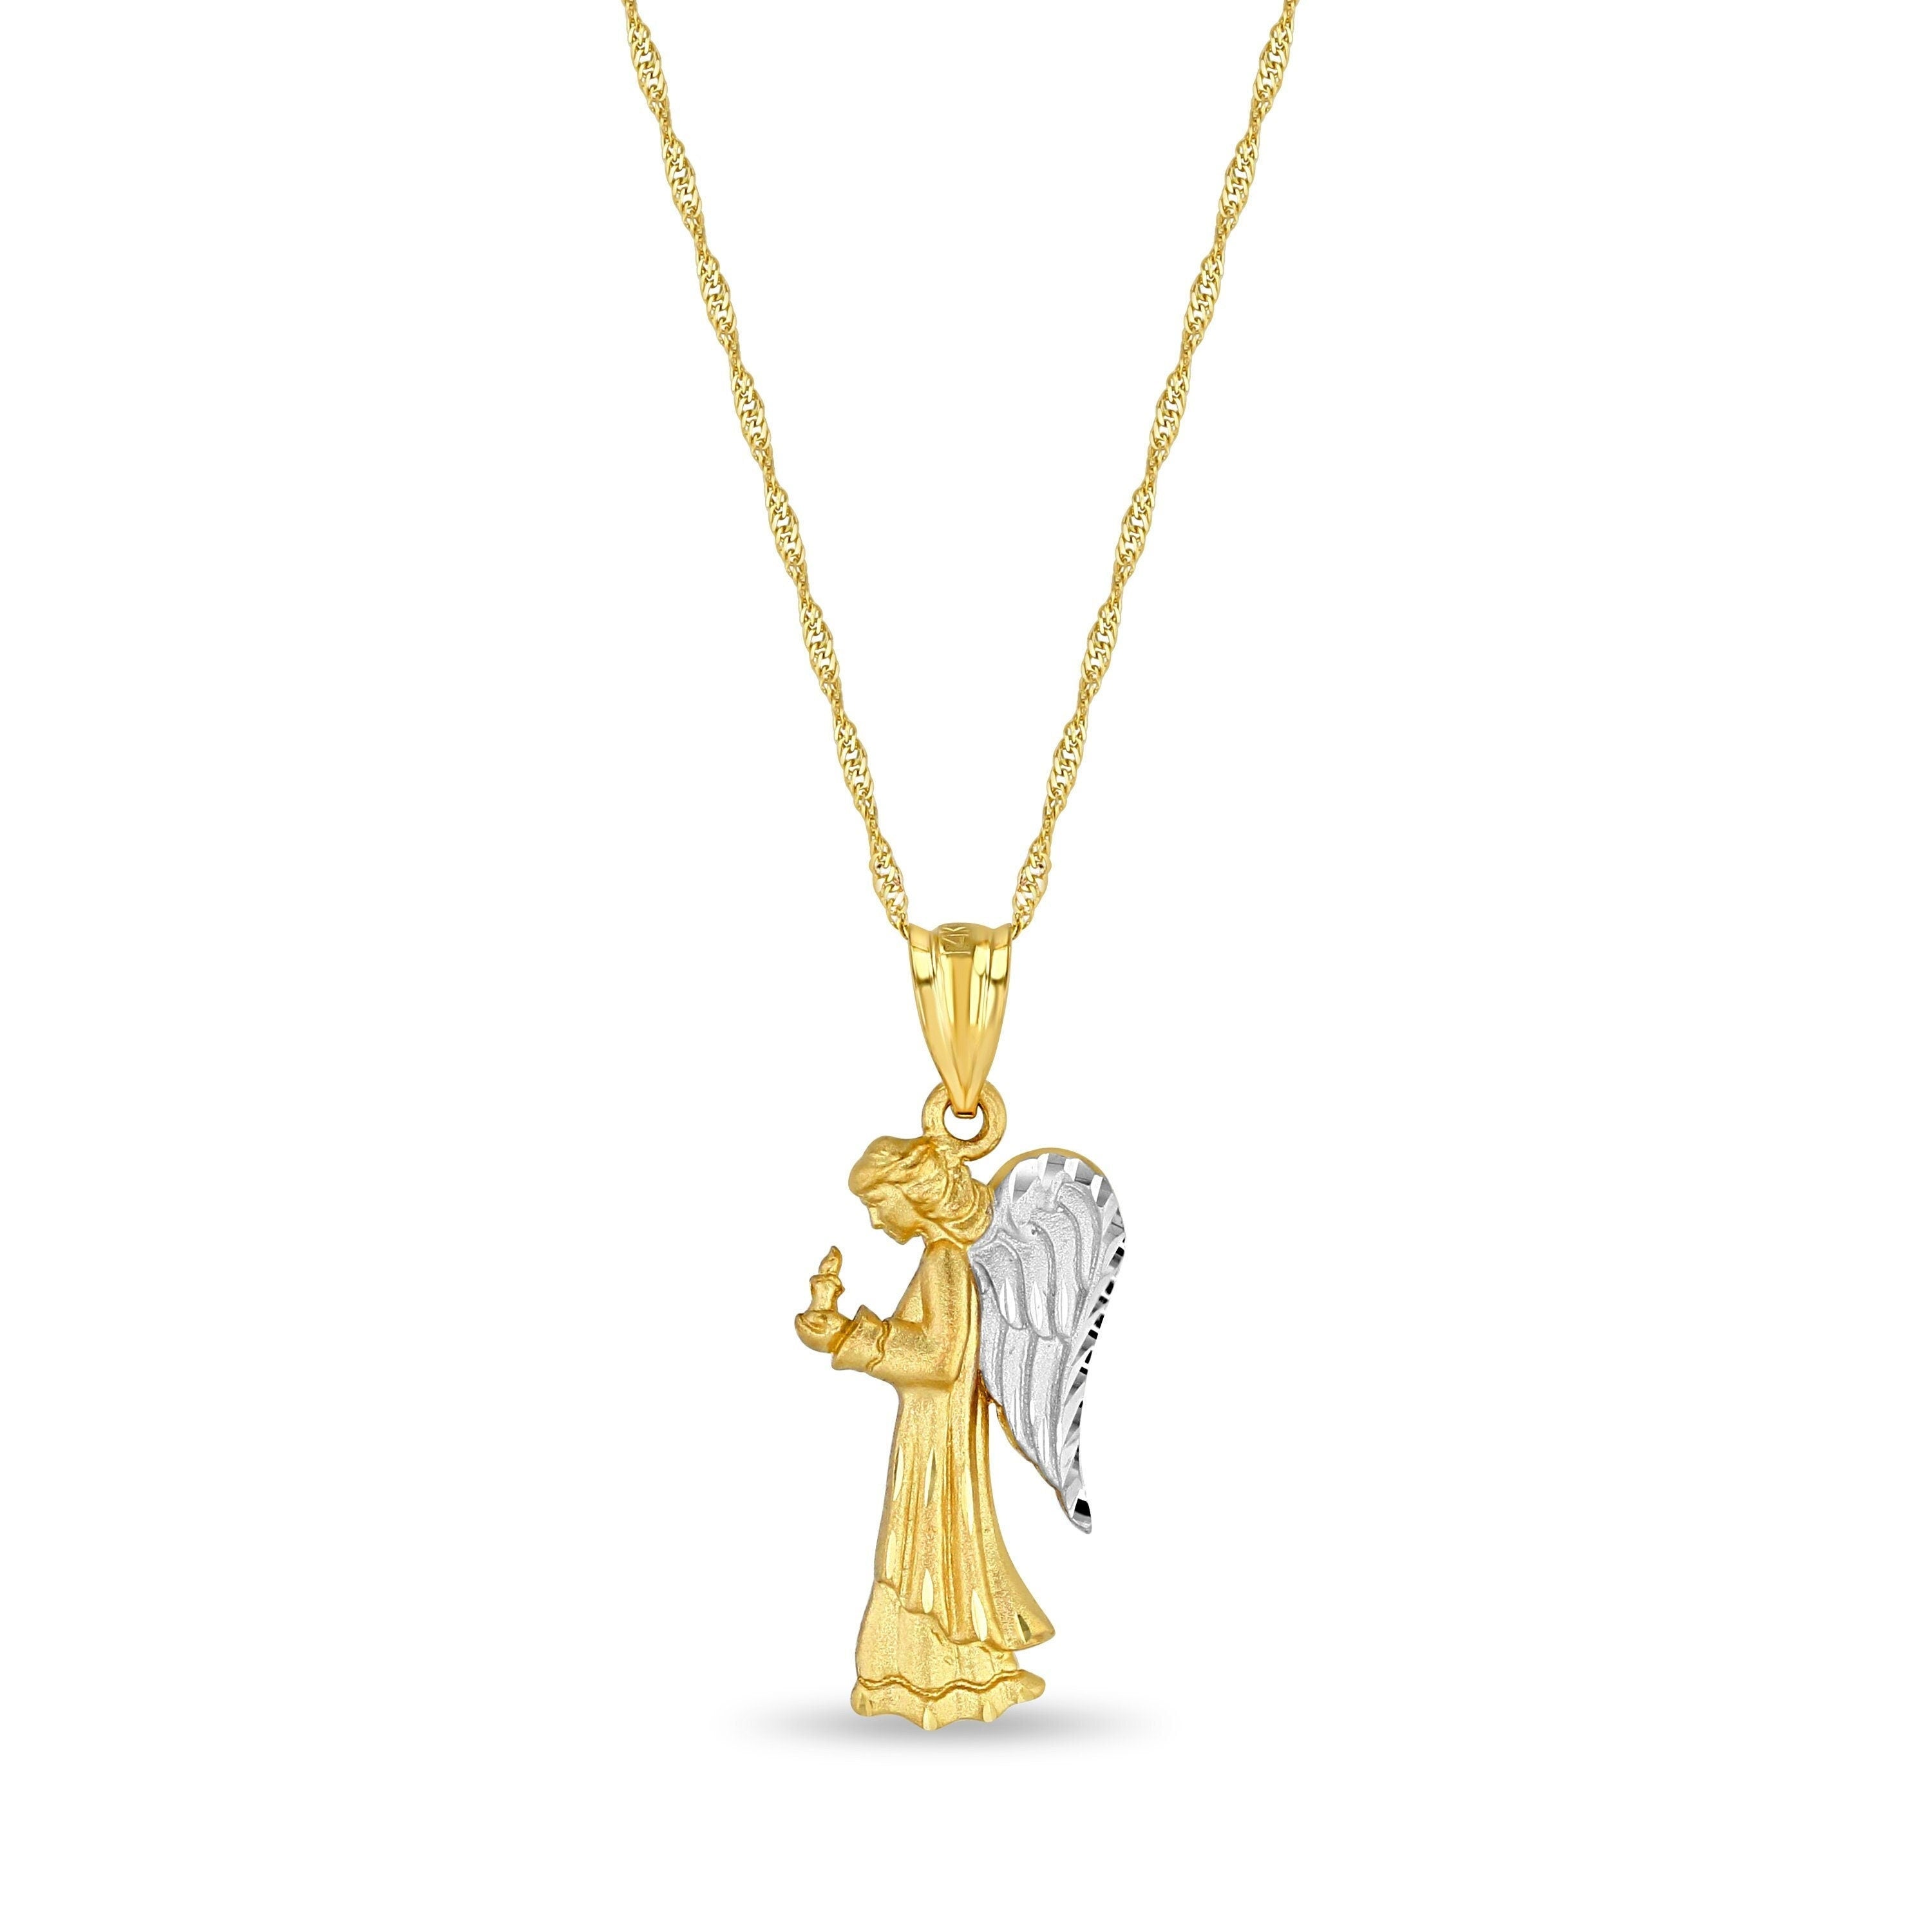 14k solid gold two tone angel holding candle pendant on 18" solid gold chain